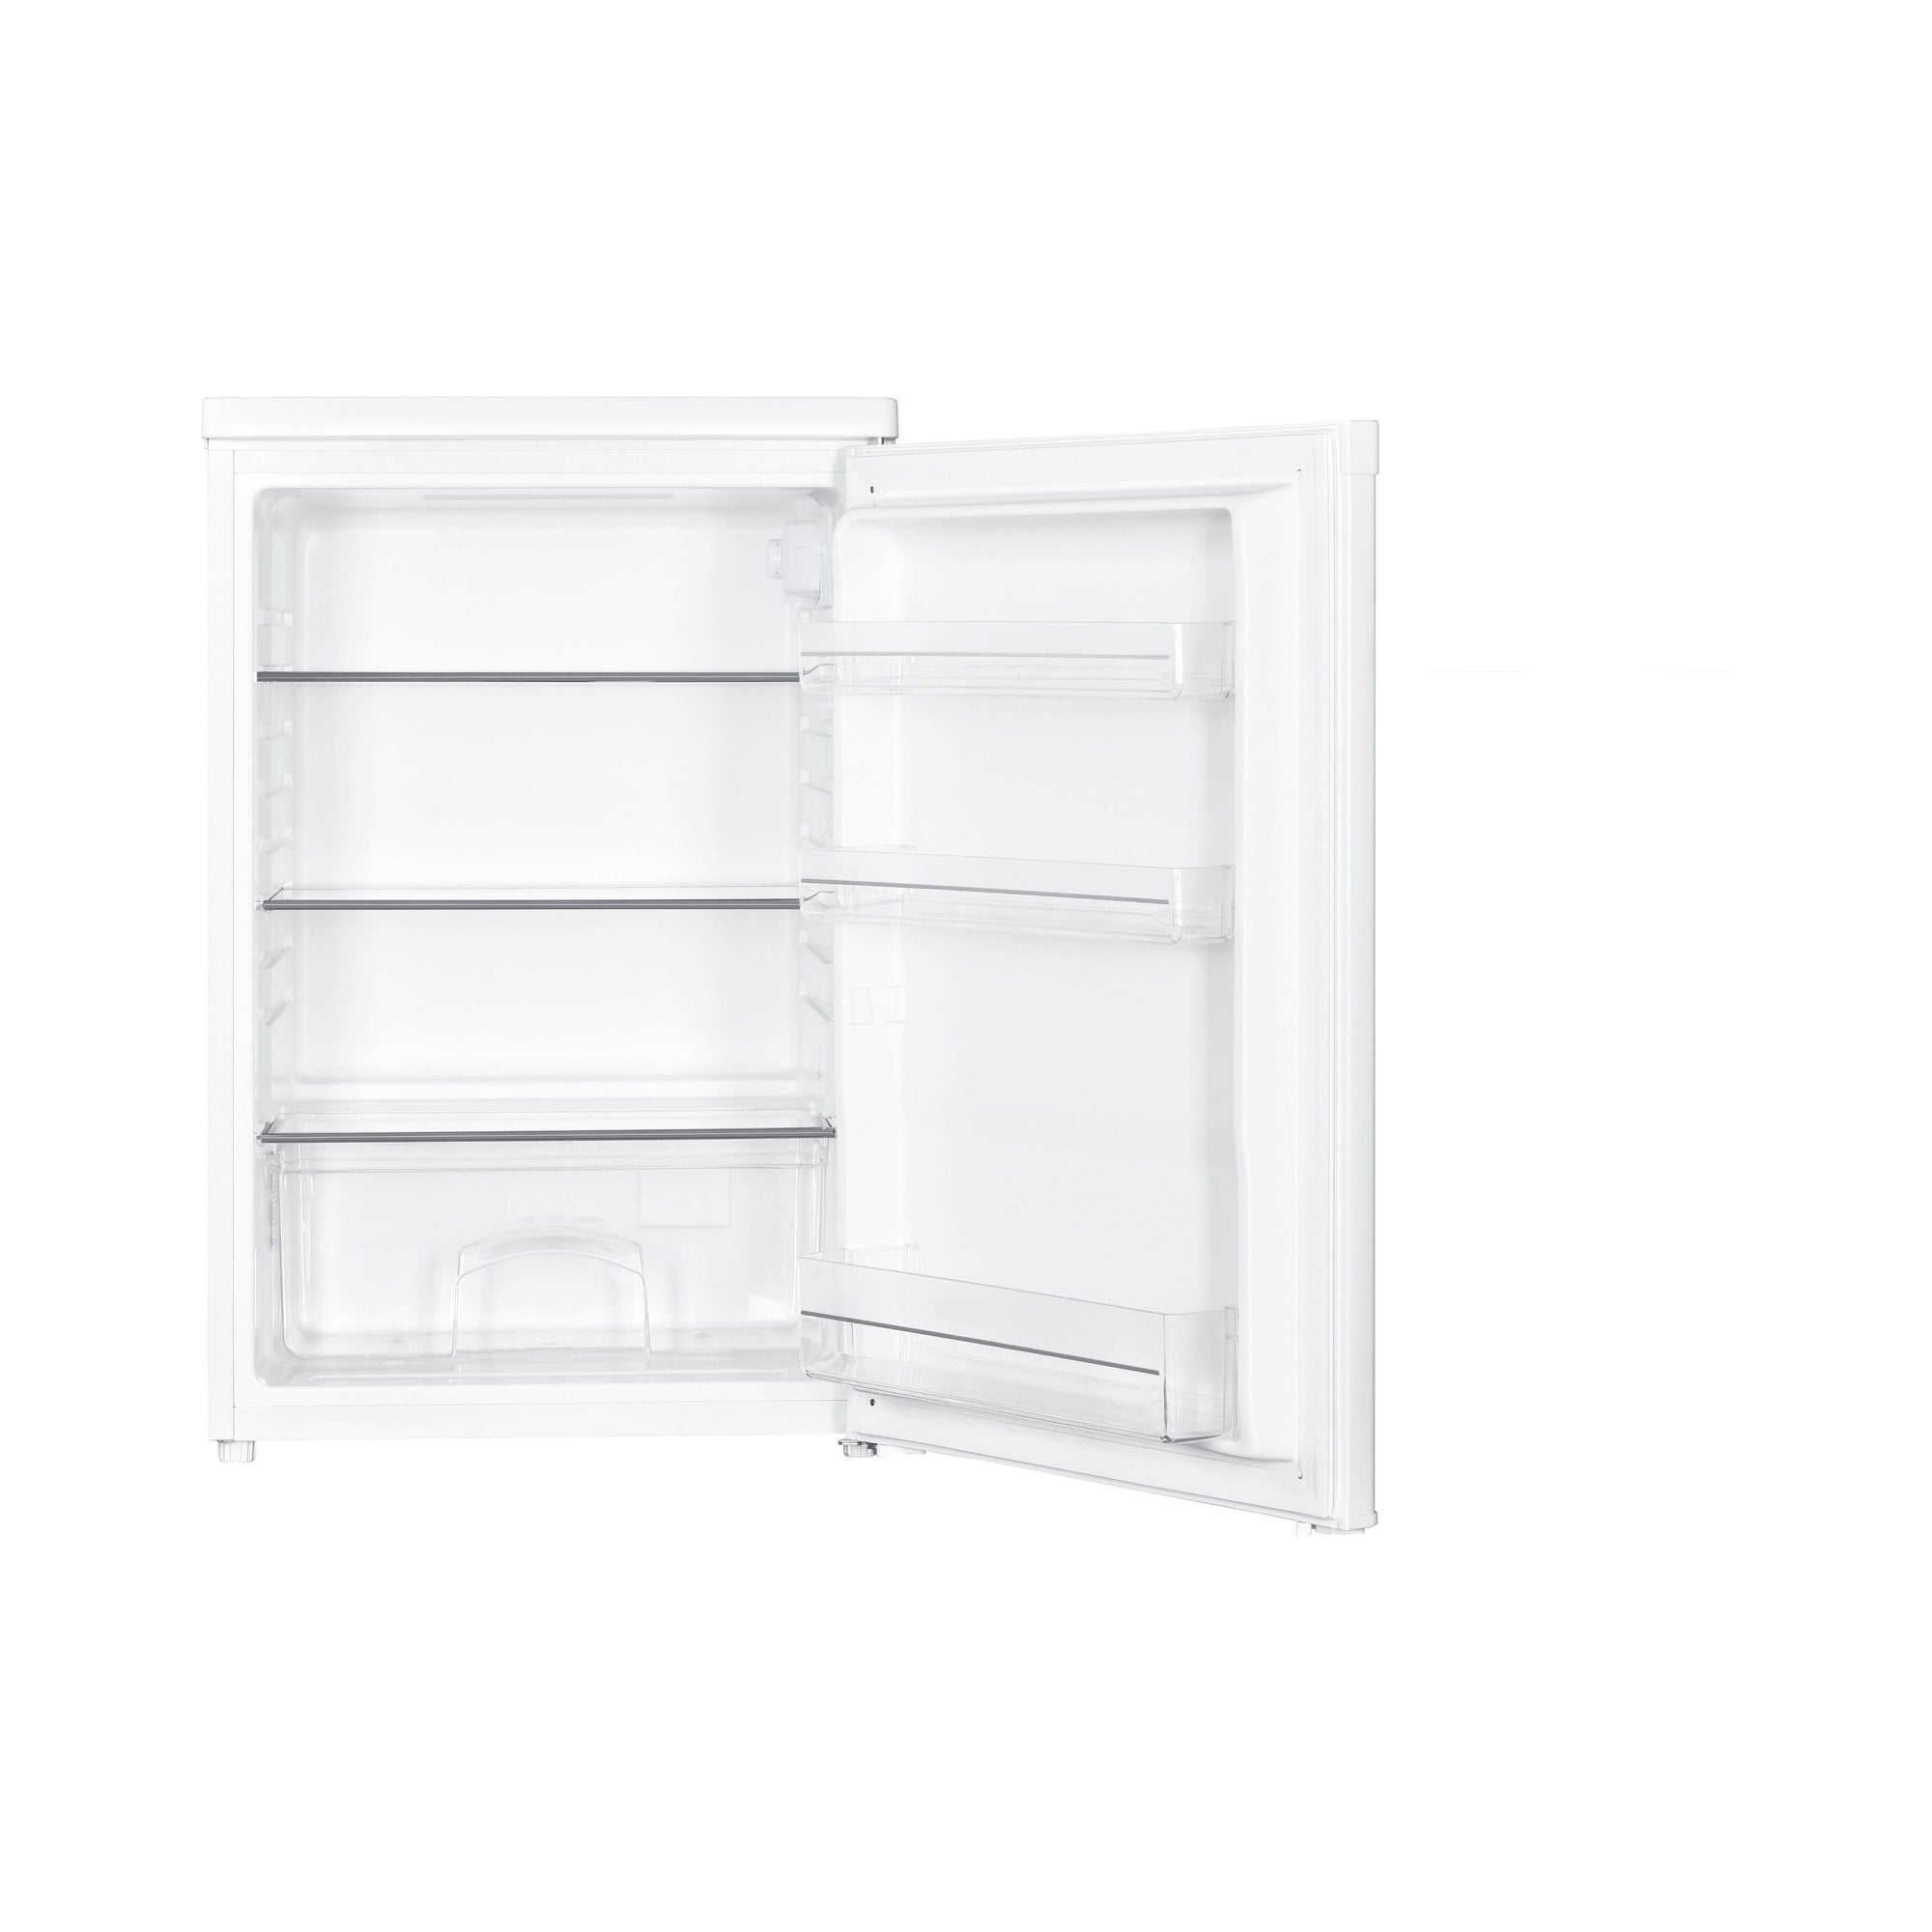 Belling 127L 55CM Undercounter Larder Fridge - White | BL130WH from Belling - DID Electrical